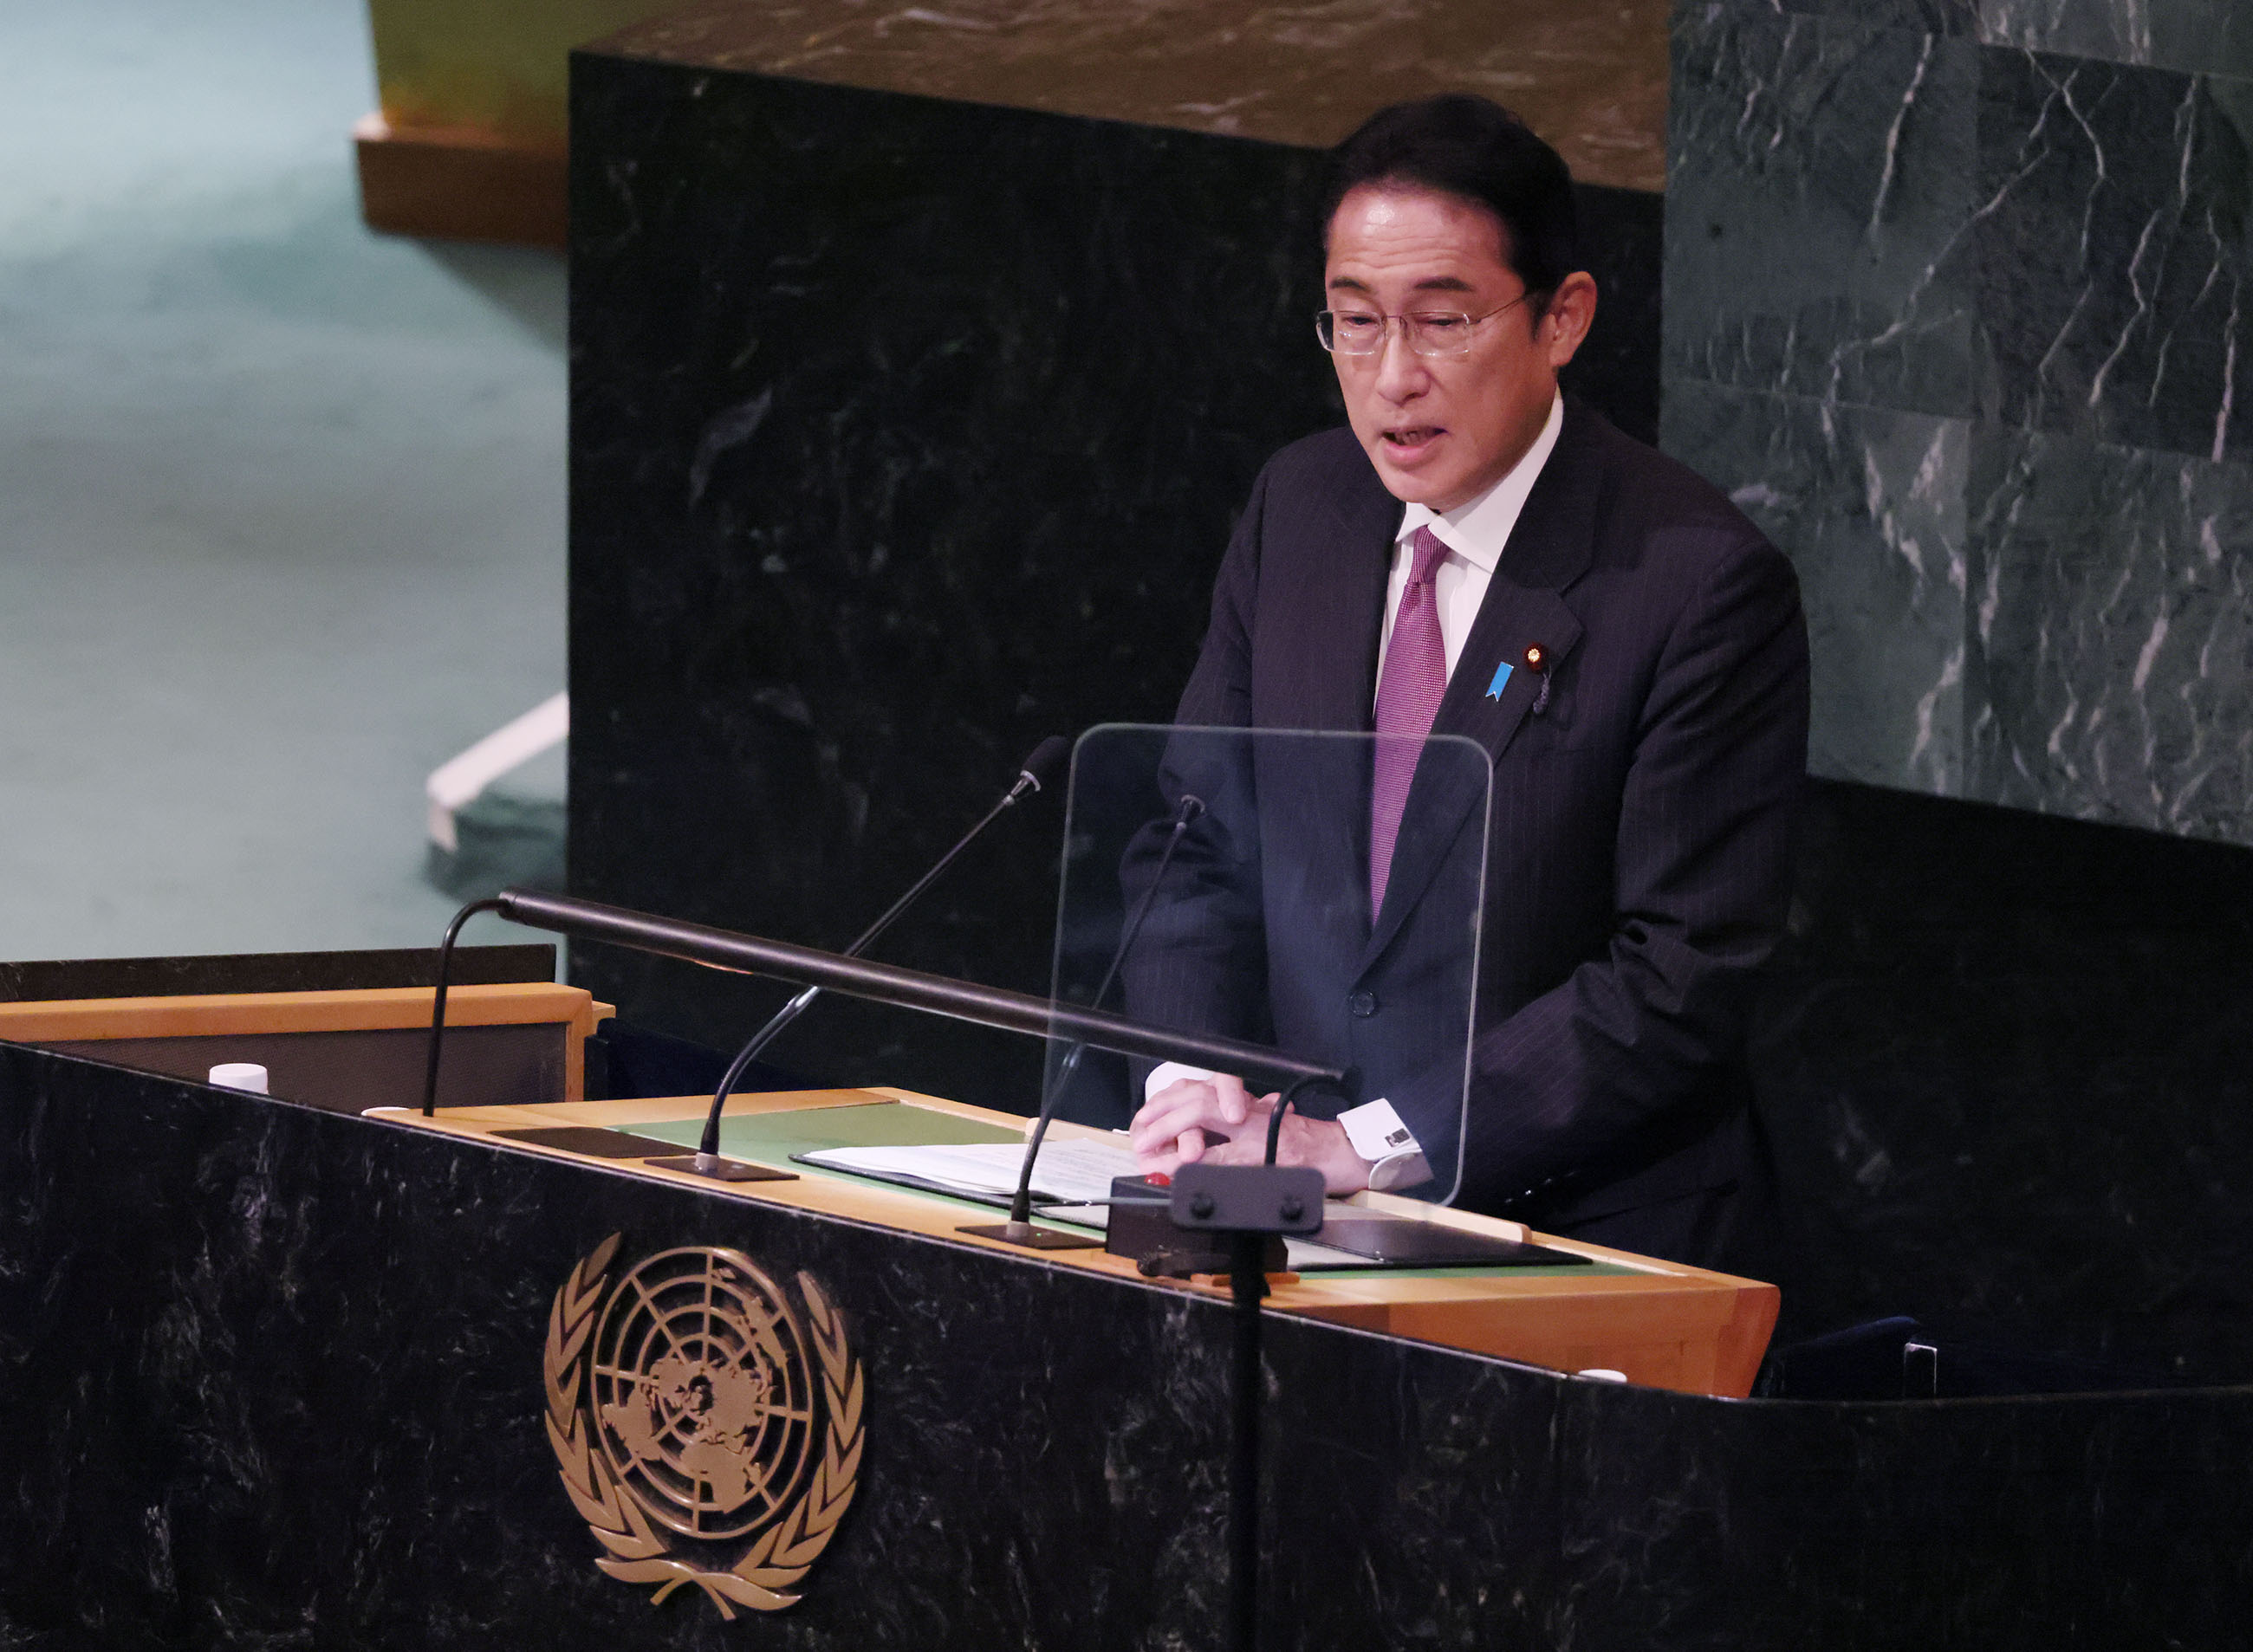 Photograph of the Prime Minister delivering an address at the United Nations General Assembly (1)